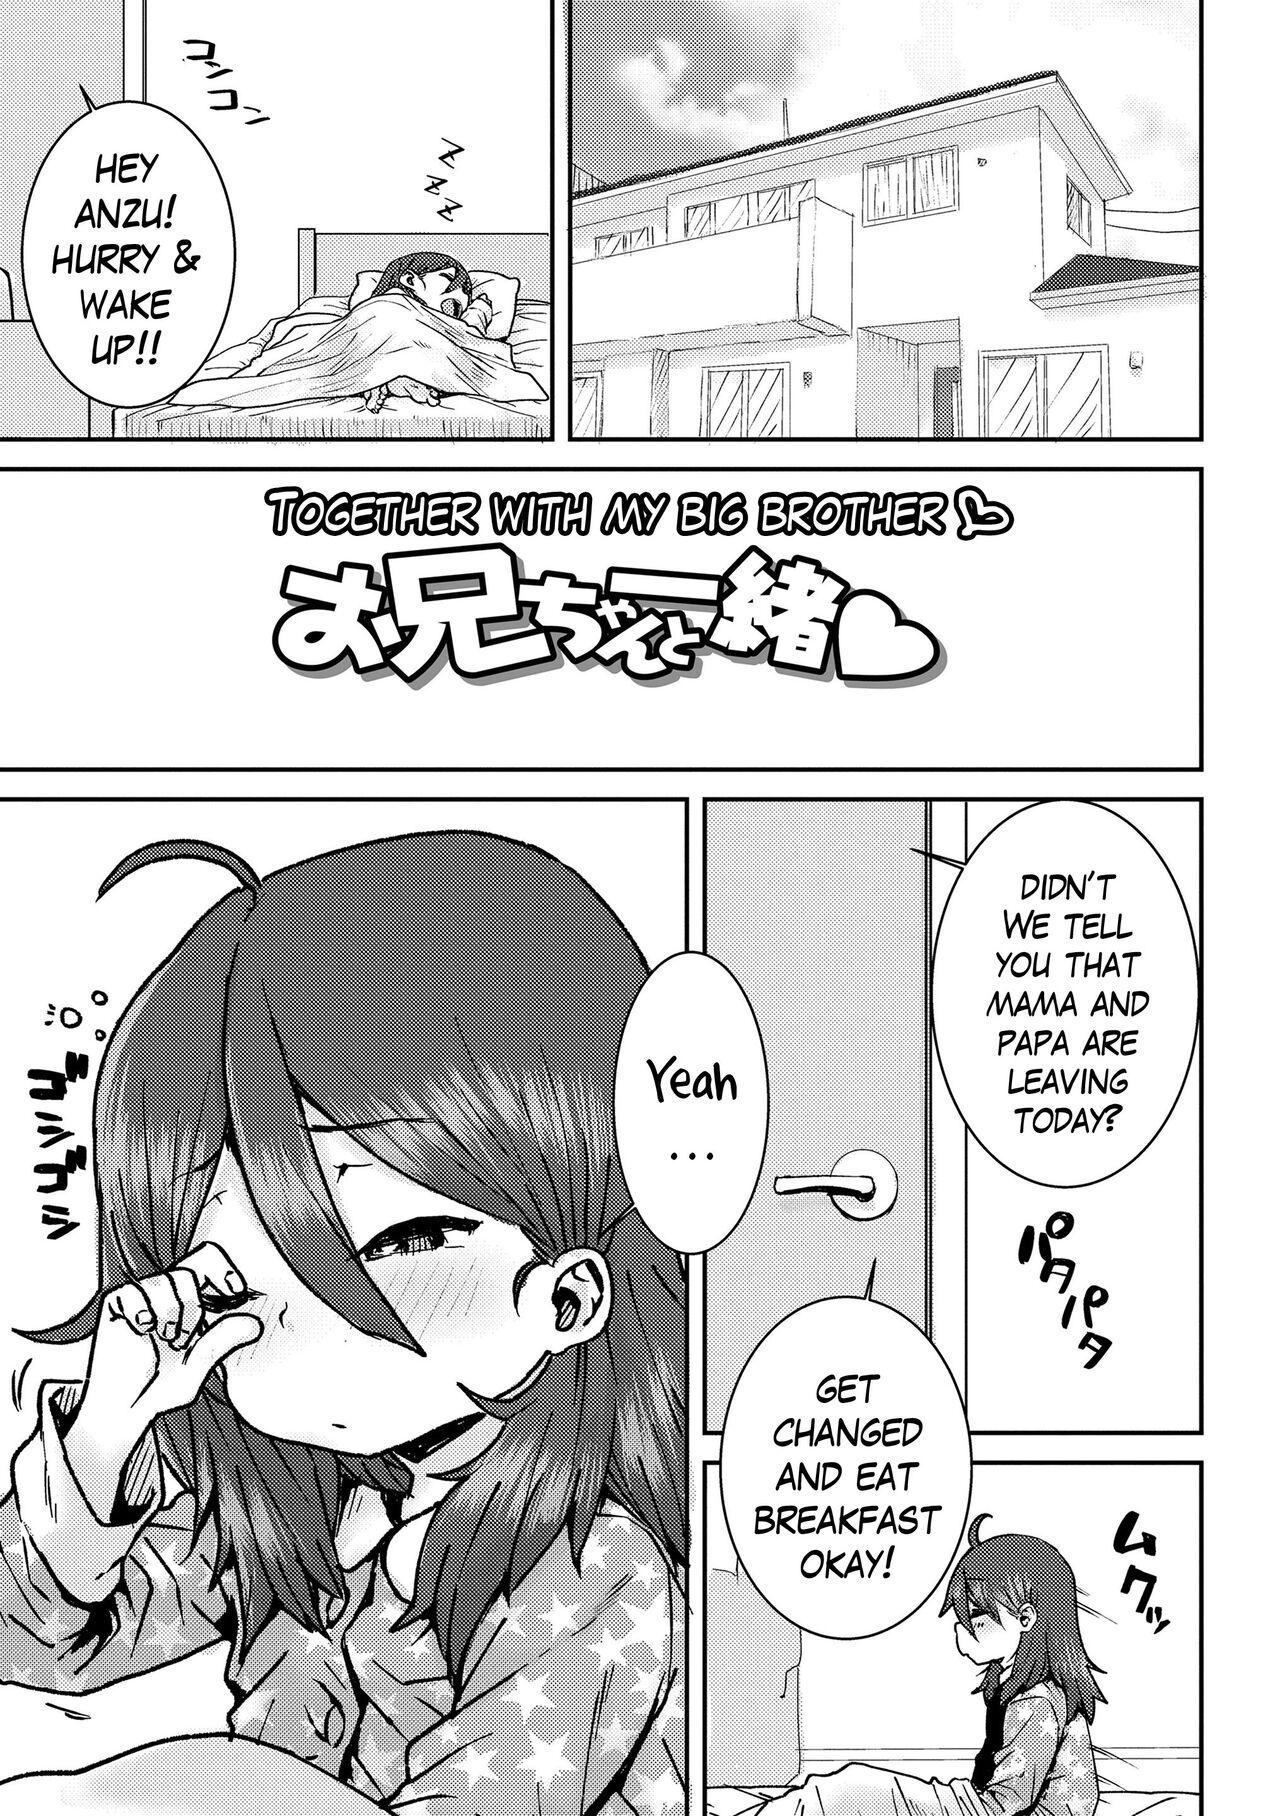 Amature Onii-chan to Issho ♡ | Together with my Big Brother ♡ Climax - Page 1